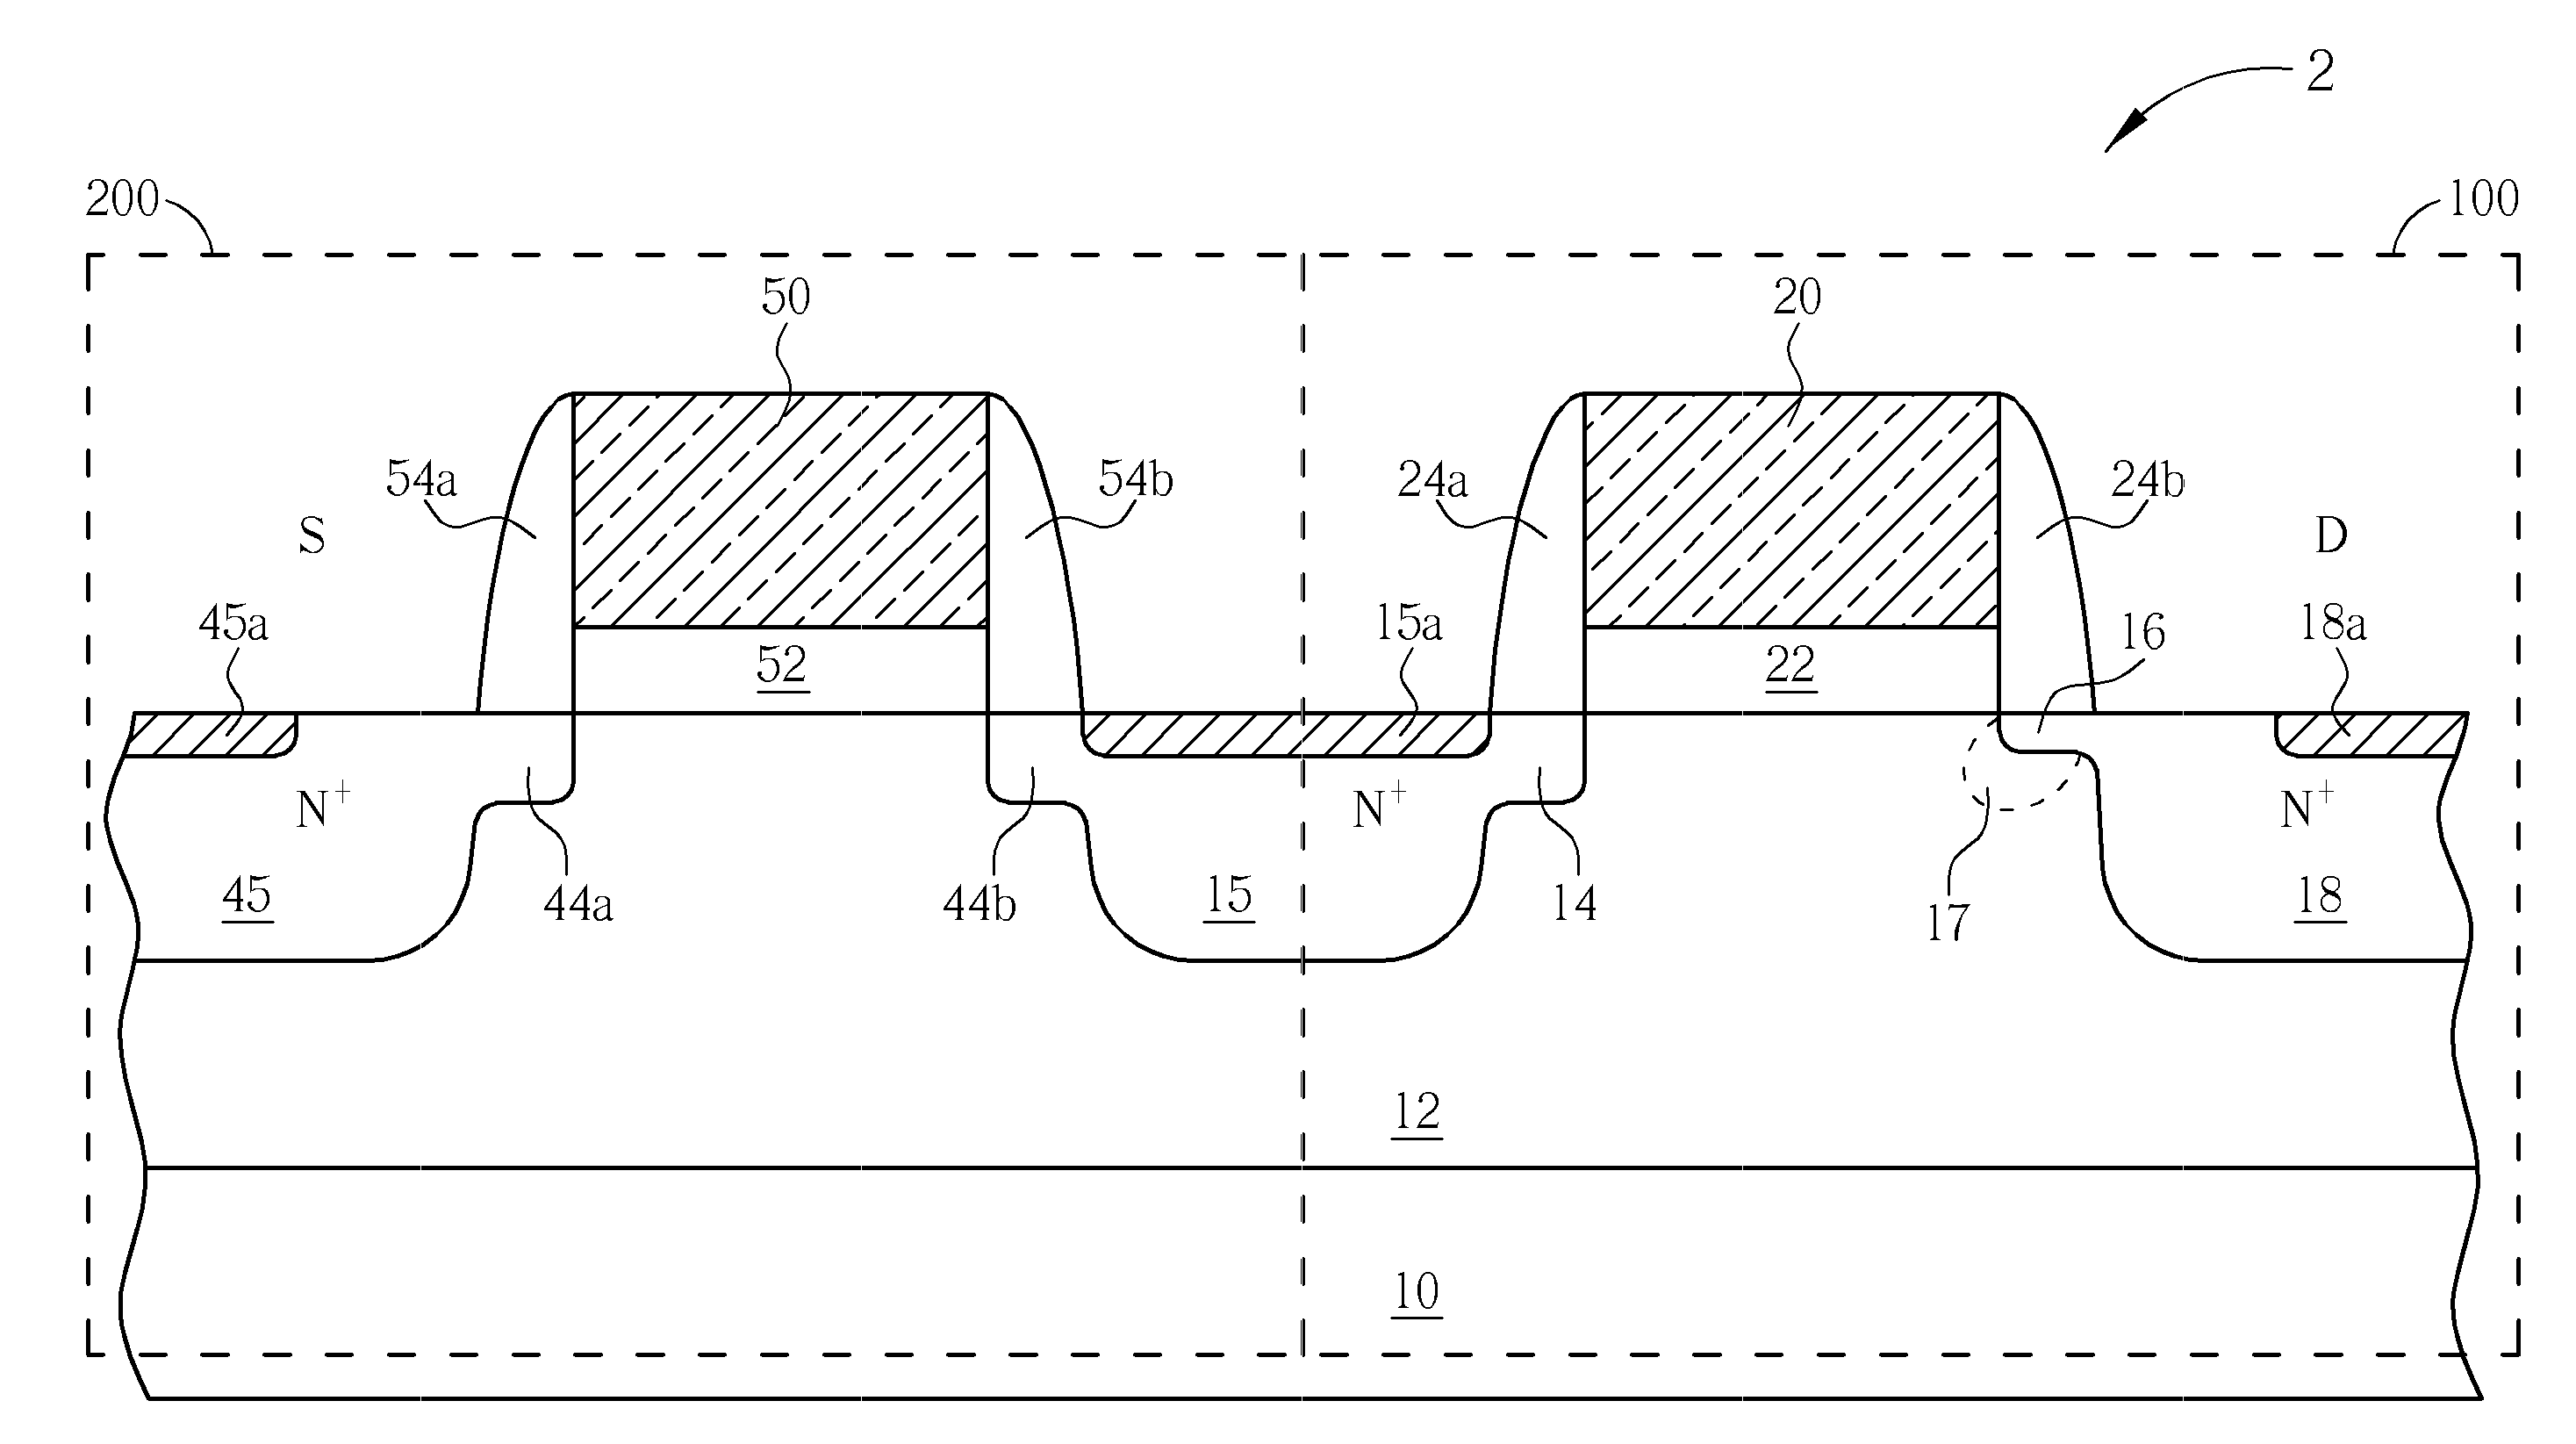 Input/output electrostatic discharge device with reduced junction breakdown voltage